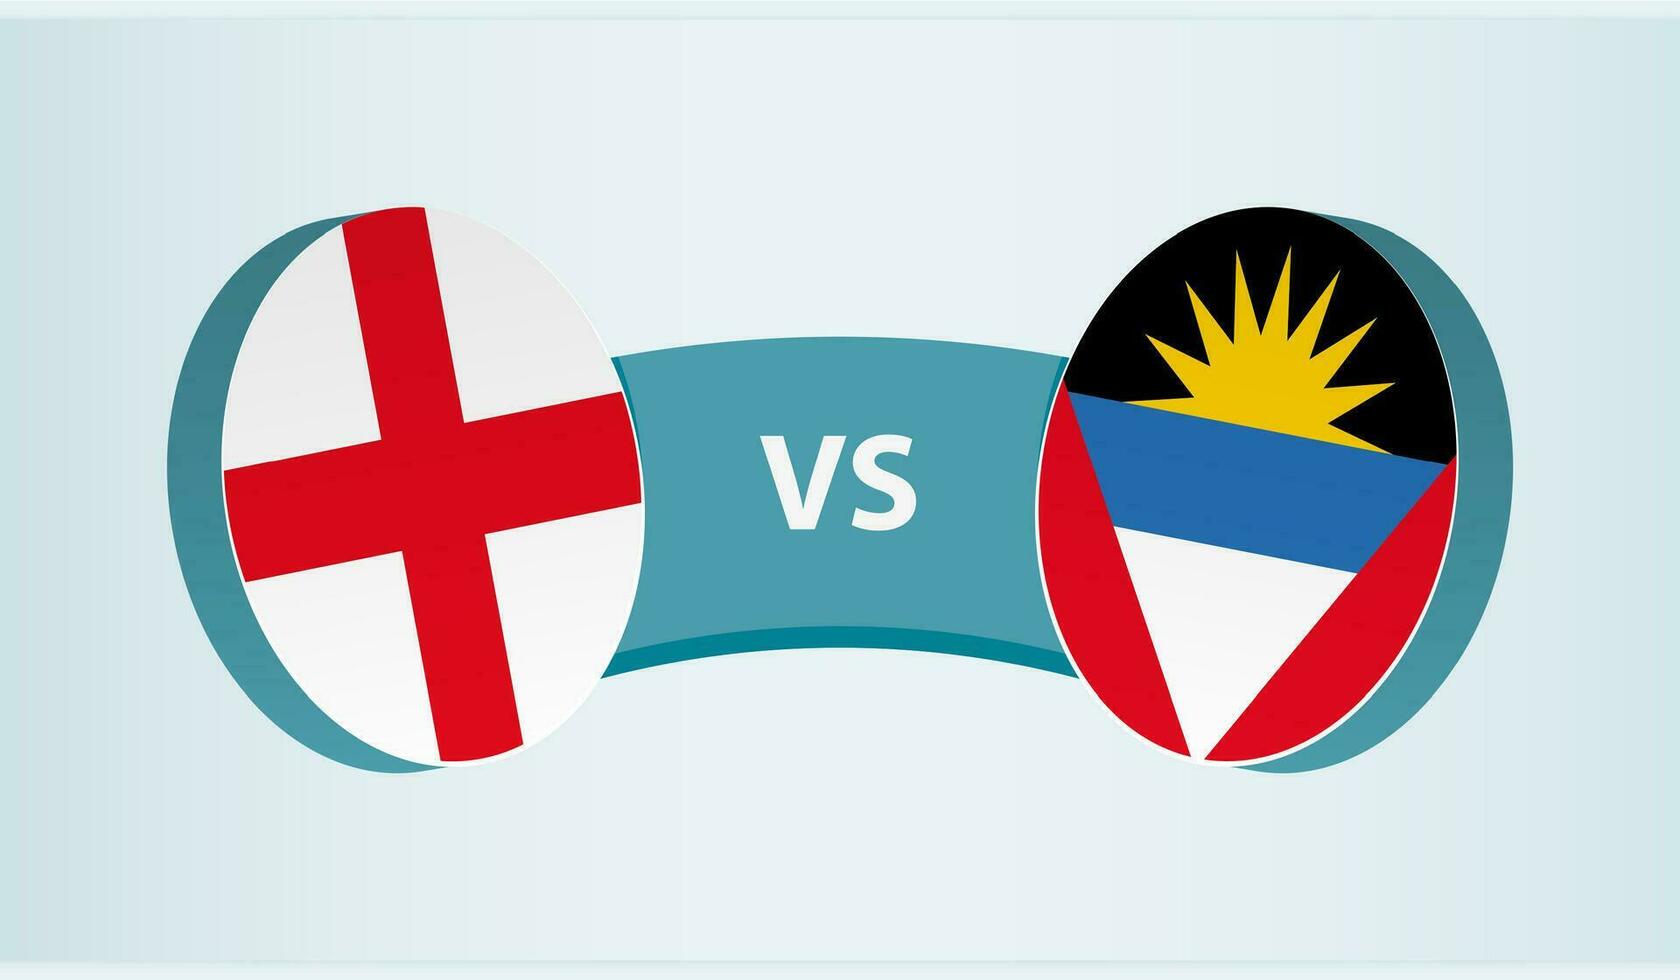 England versus Antigua and Barbuda, team sports competition concept. vector